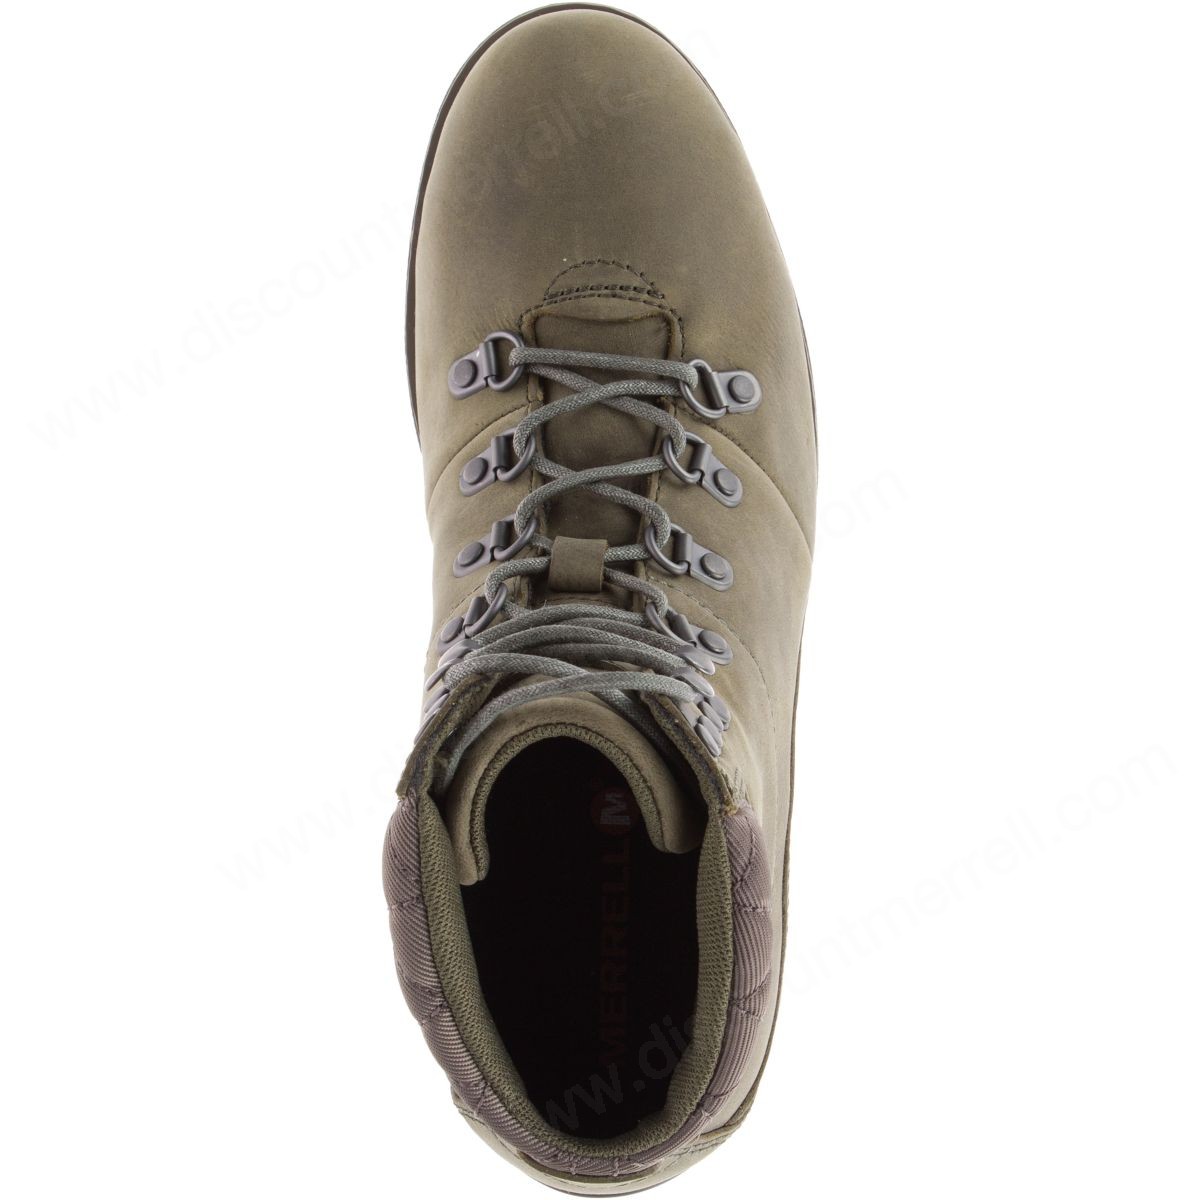 Merrell Woman's Chateau Mid Lace Waterproof Dusty Olive - -2